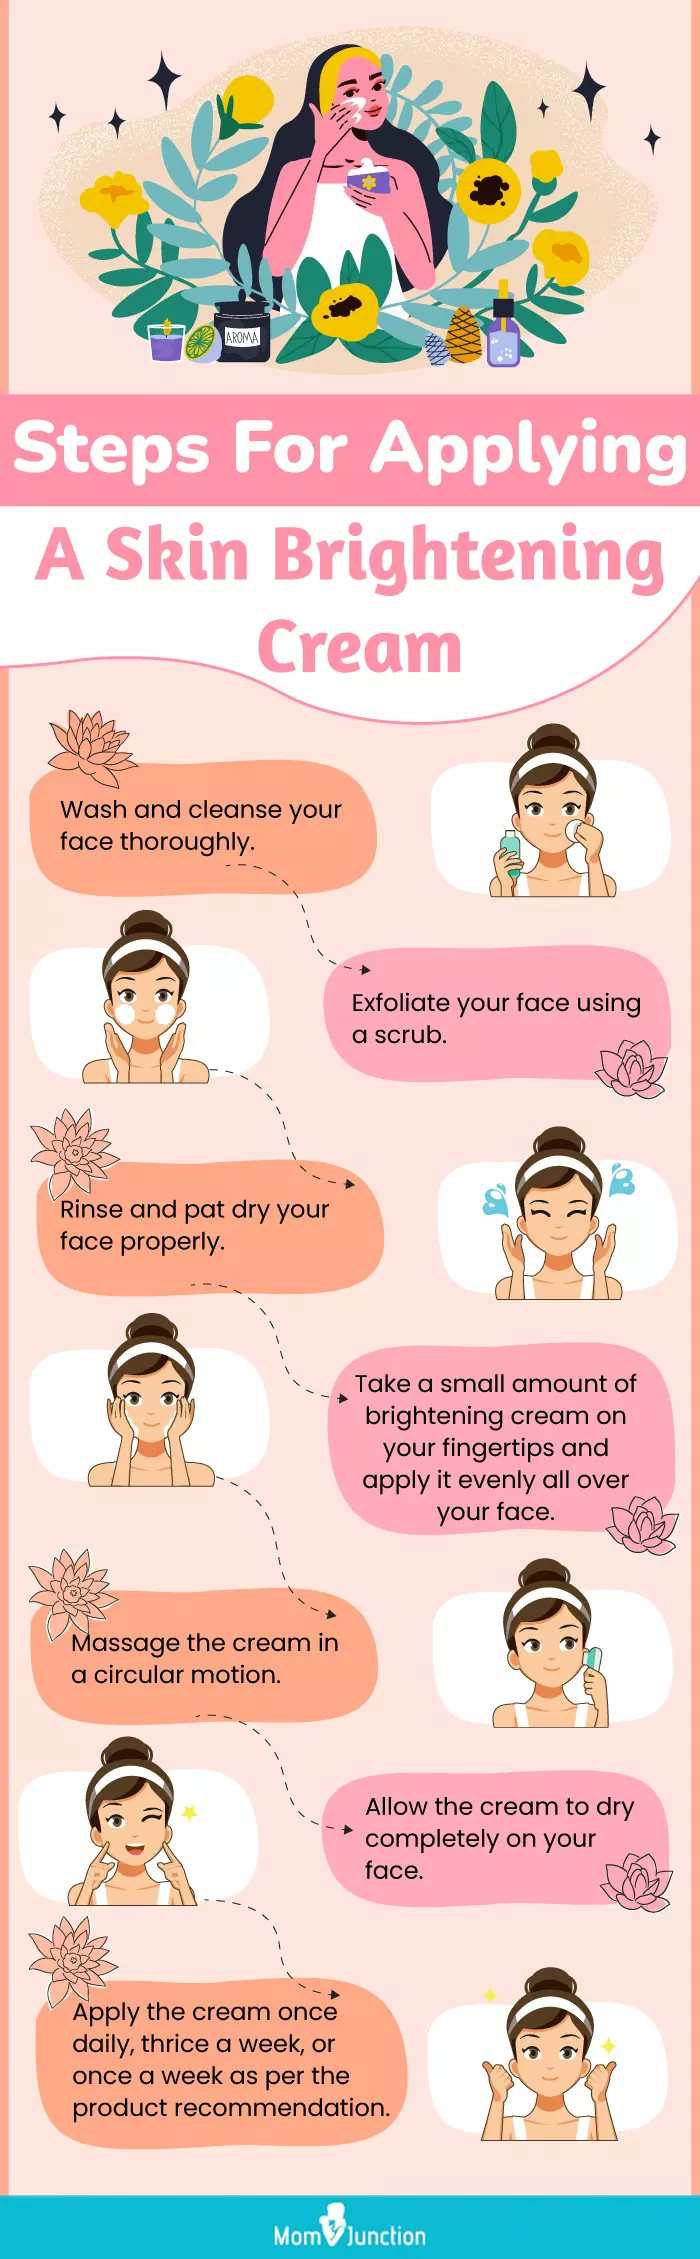 Steps For Applying A Skin Brightening Cream For Best Results(infographic)